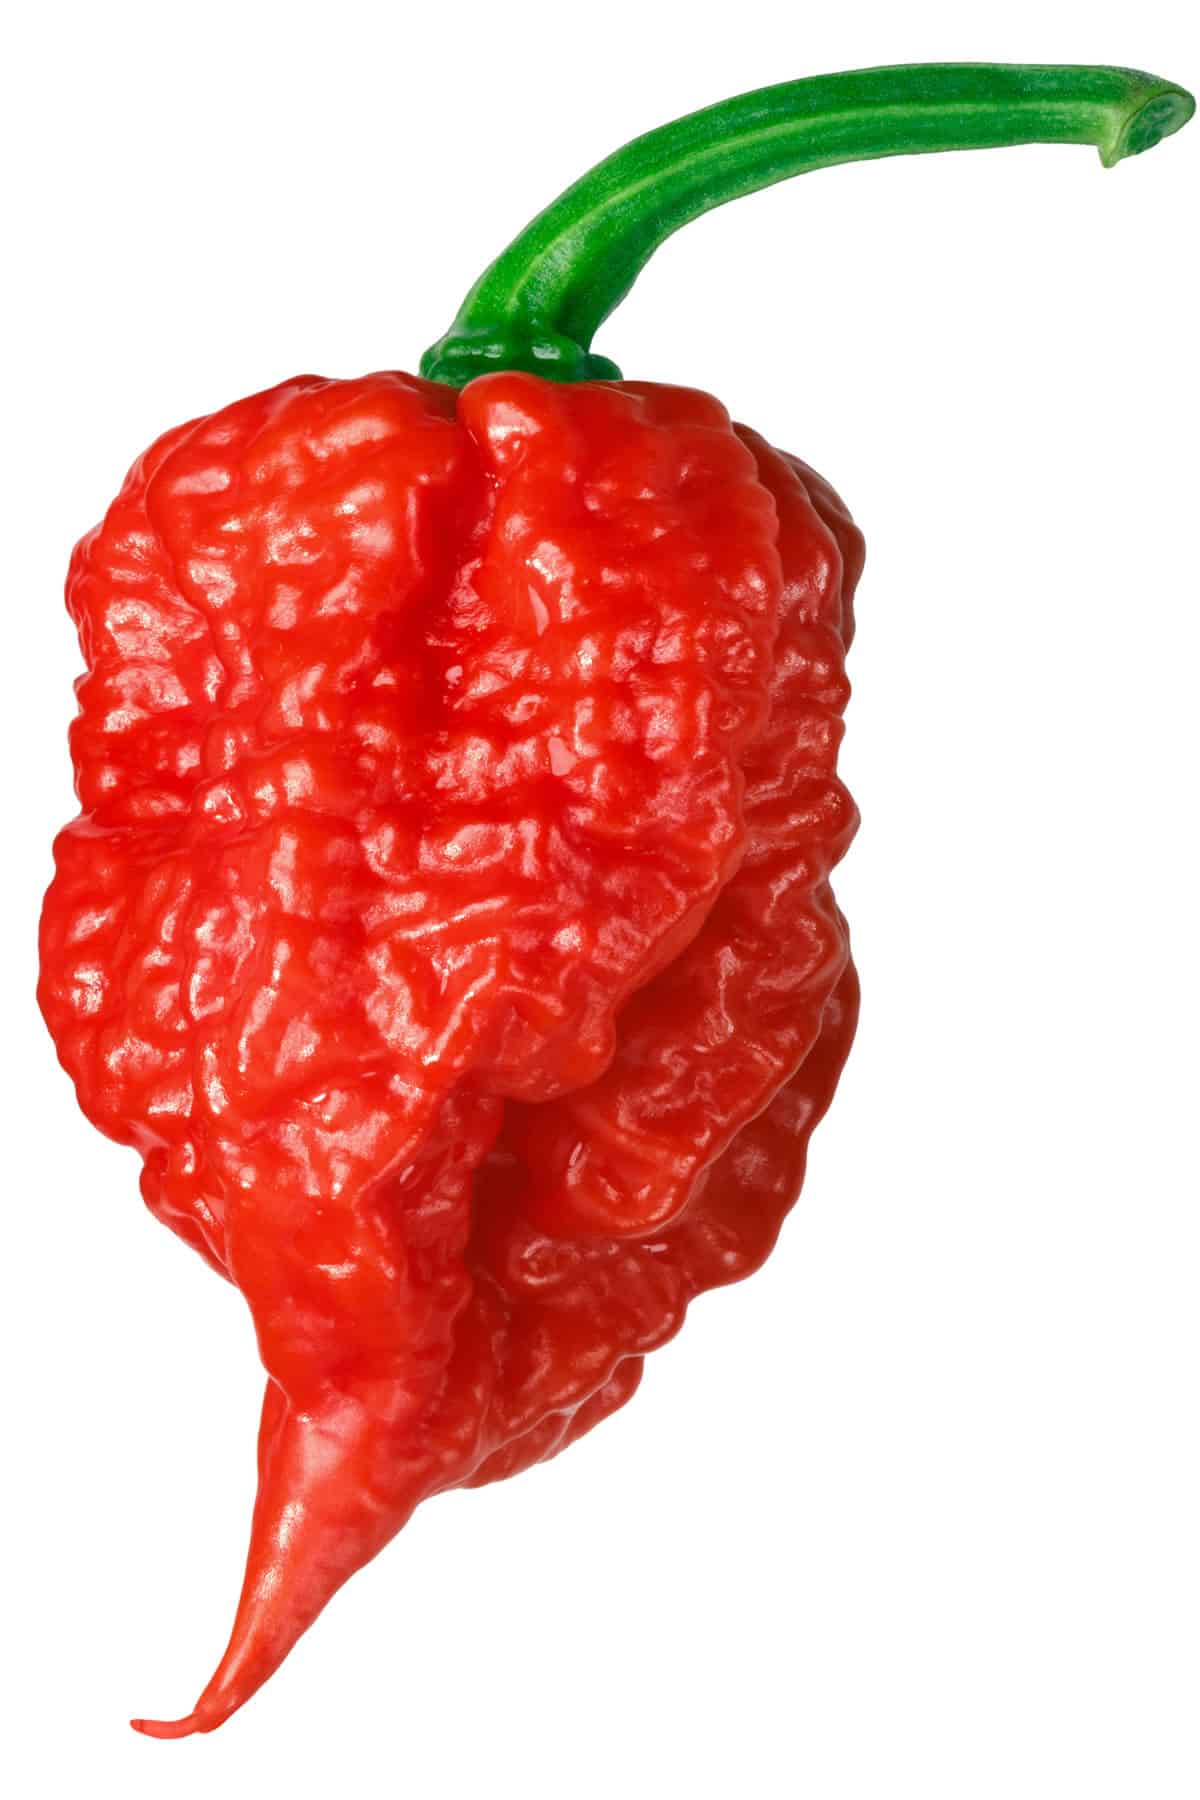 Carolina Reaper: Hottest Pepper in the World - All About It ...